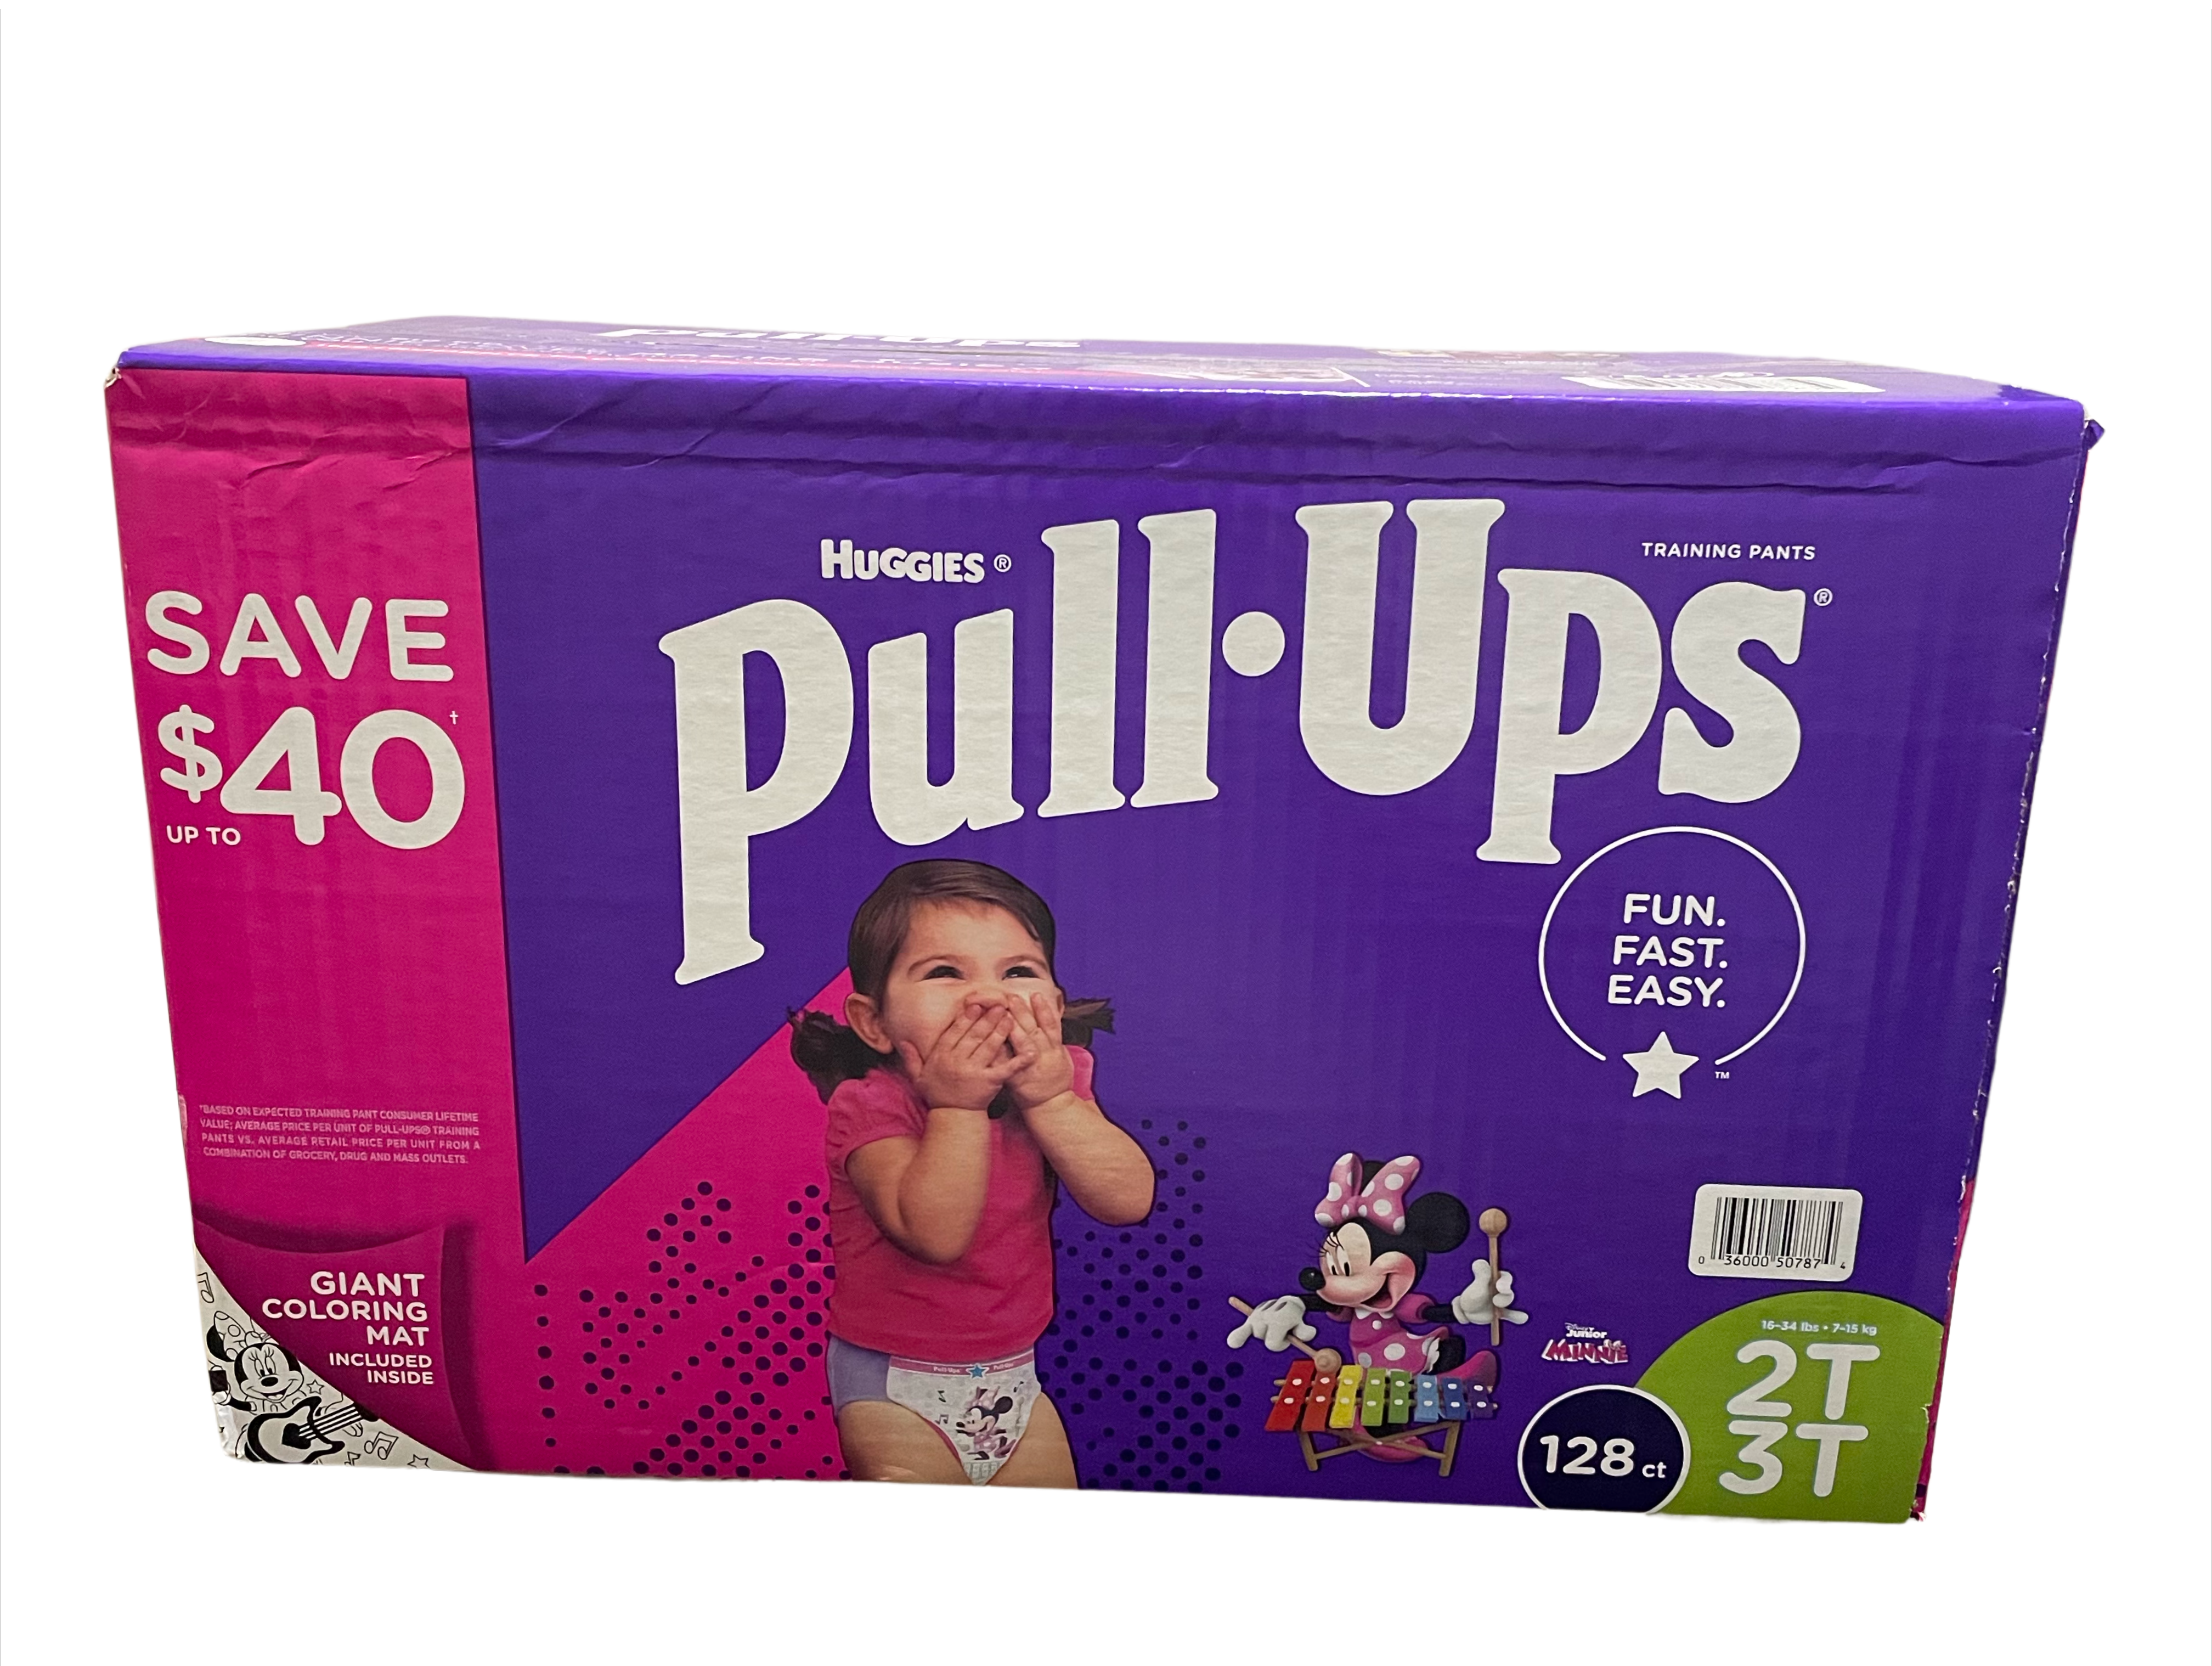 Huggies Pull-Ups Plus Training Pants For Girls, 2T-3T (128 Count)